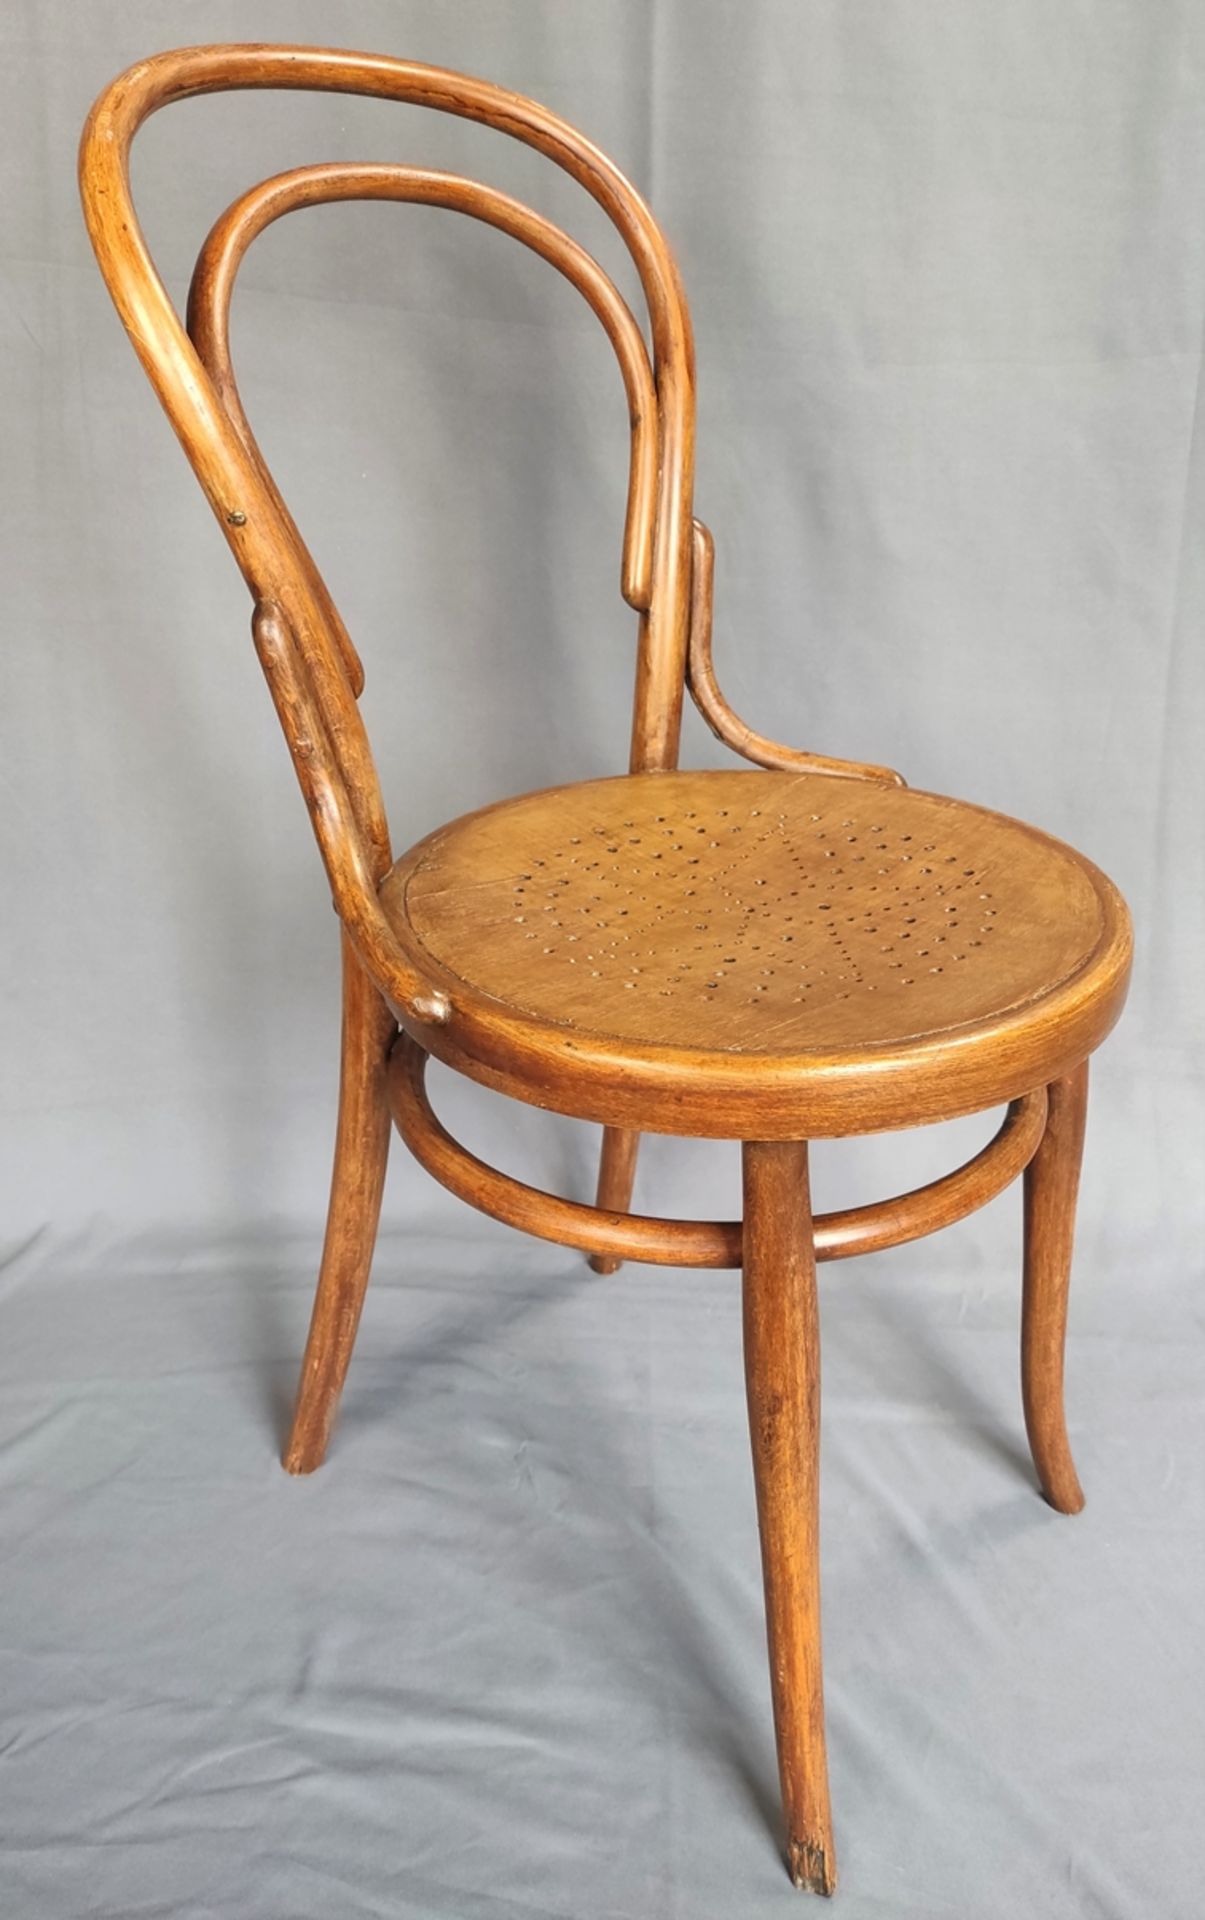 4 bentwood chairs, Viennese bistro chairs, model Thonet, around 1900, h 88cm, seat height 47cm, one - Image 2 of 4